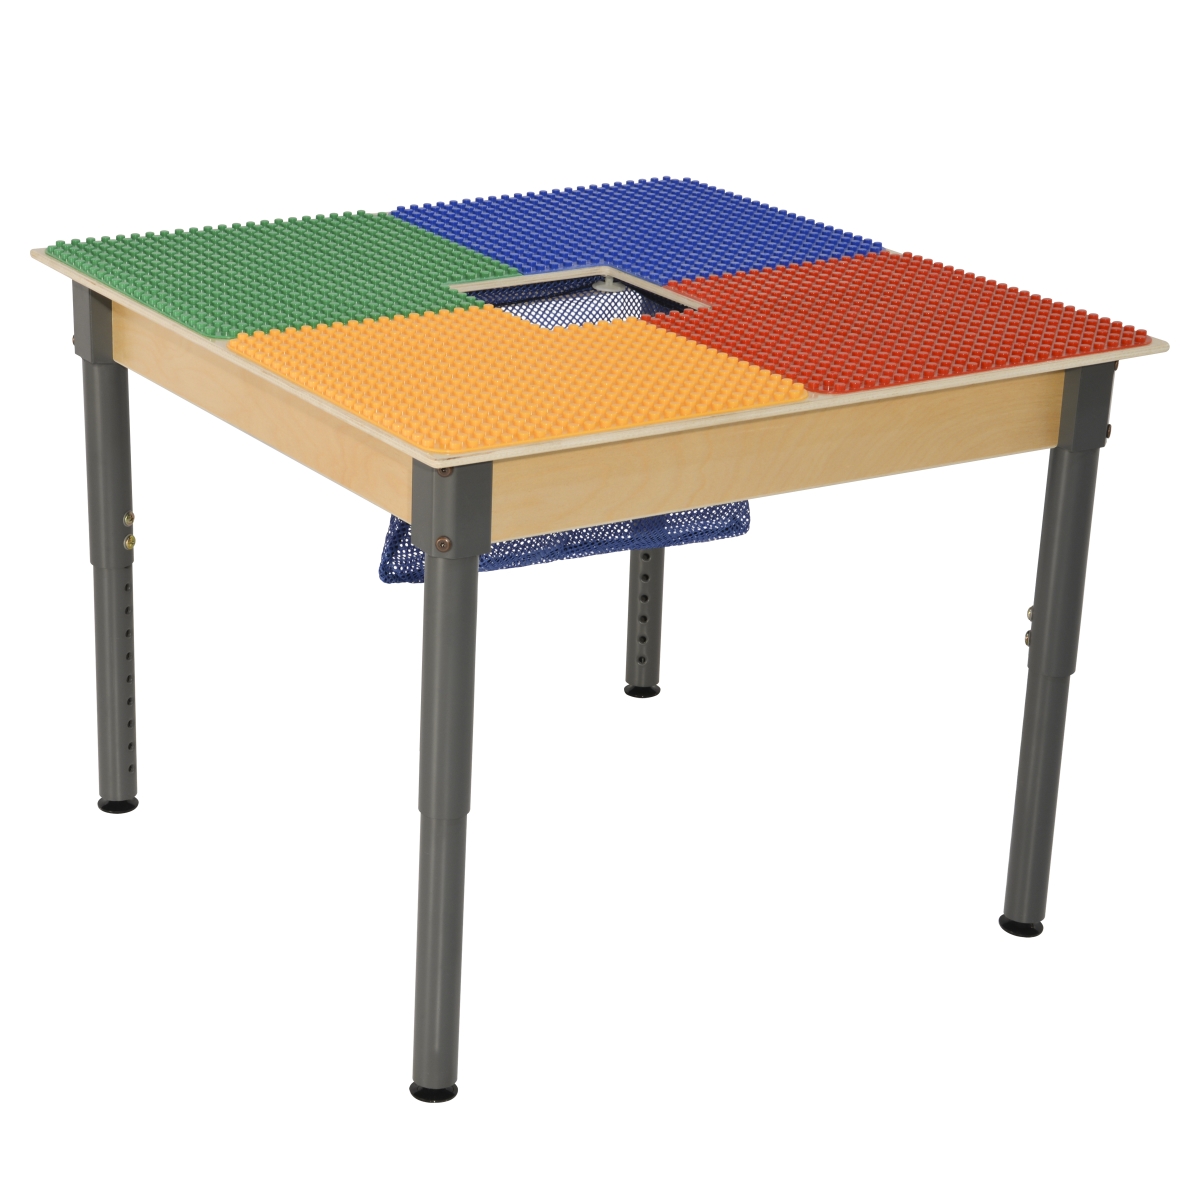 Tp3131pgna1217 12 X 17 In. Duplo Compatible Square Table With Adjustable Legs, Multi Color